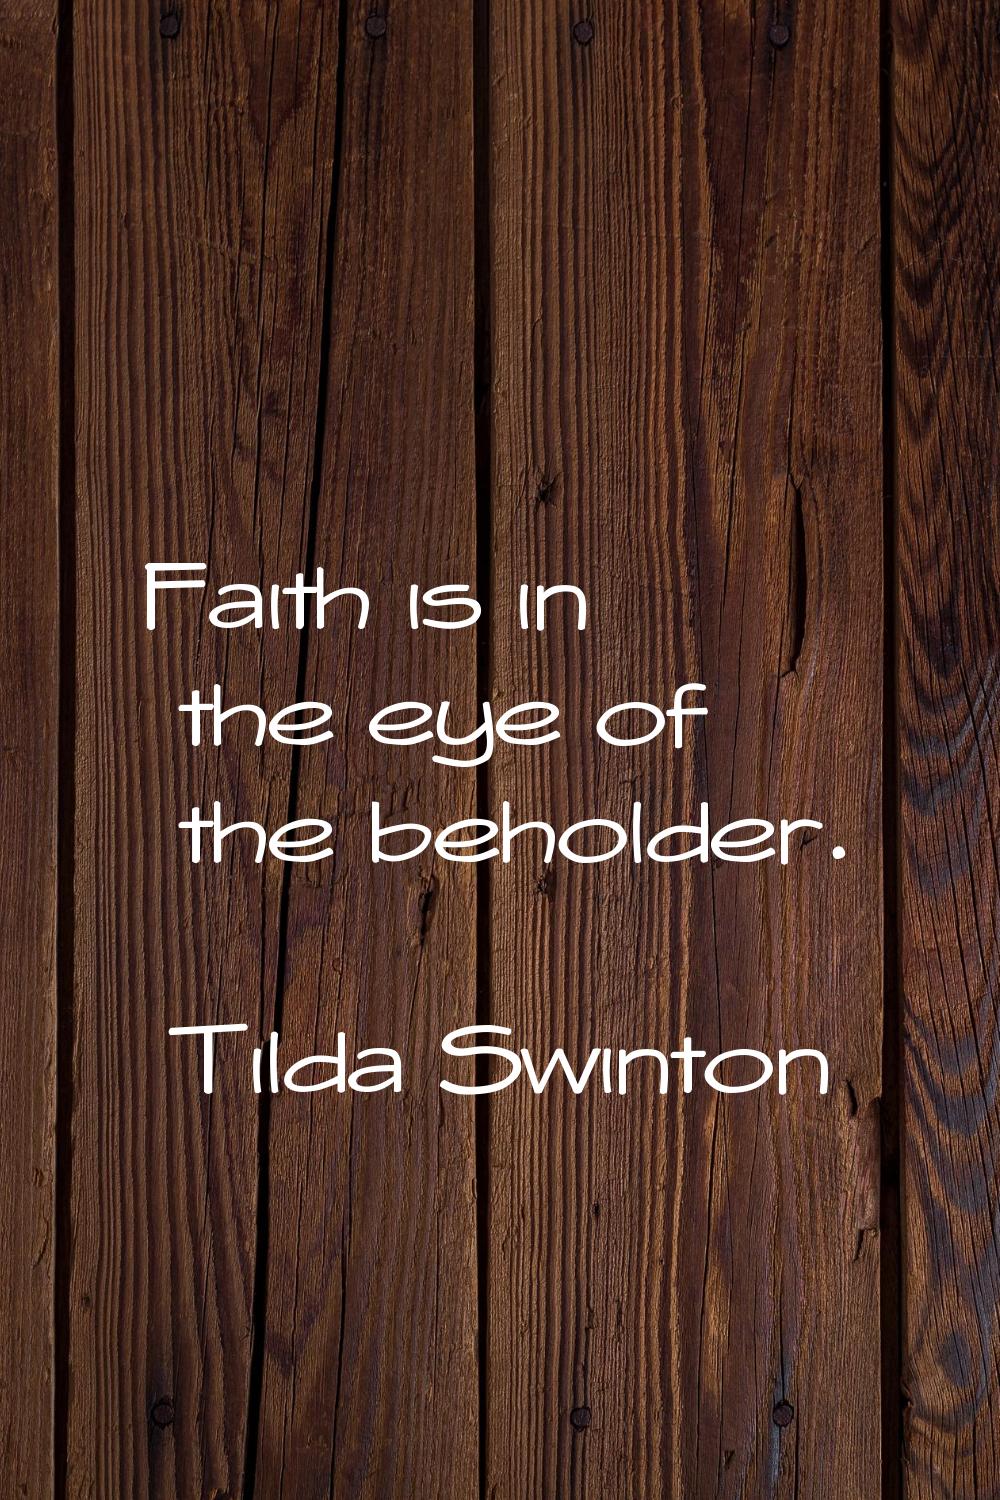 Faith is in the eye of the beholder.